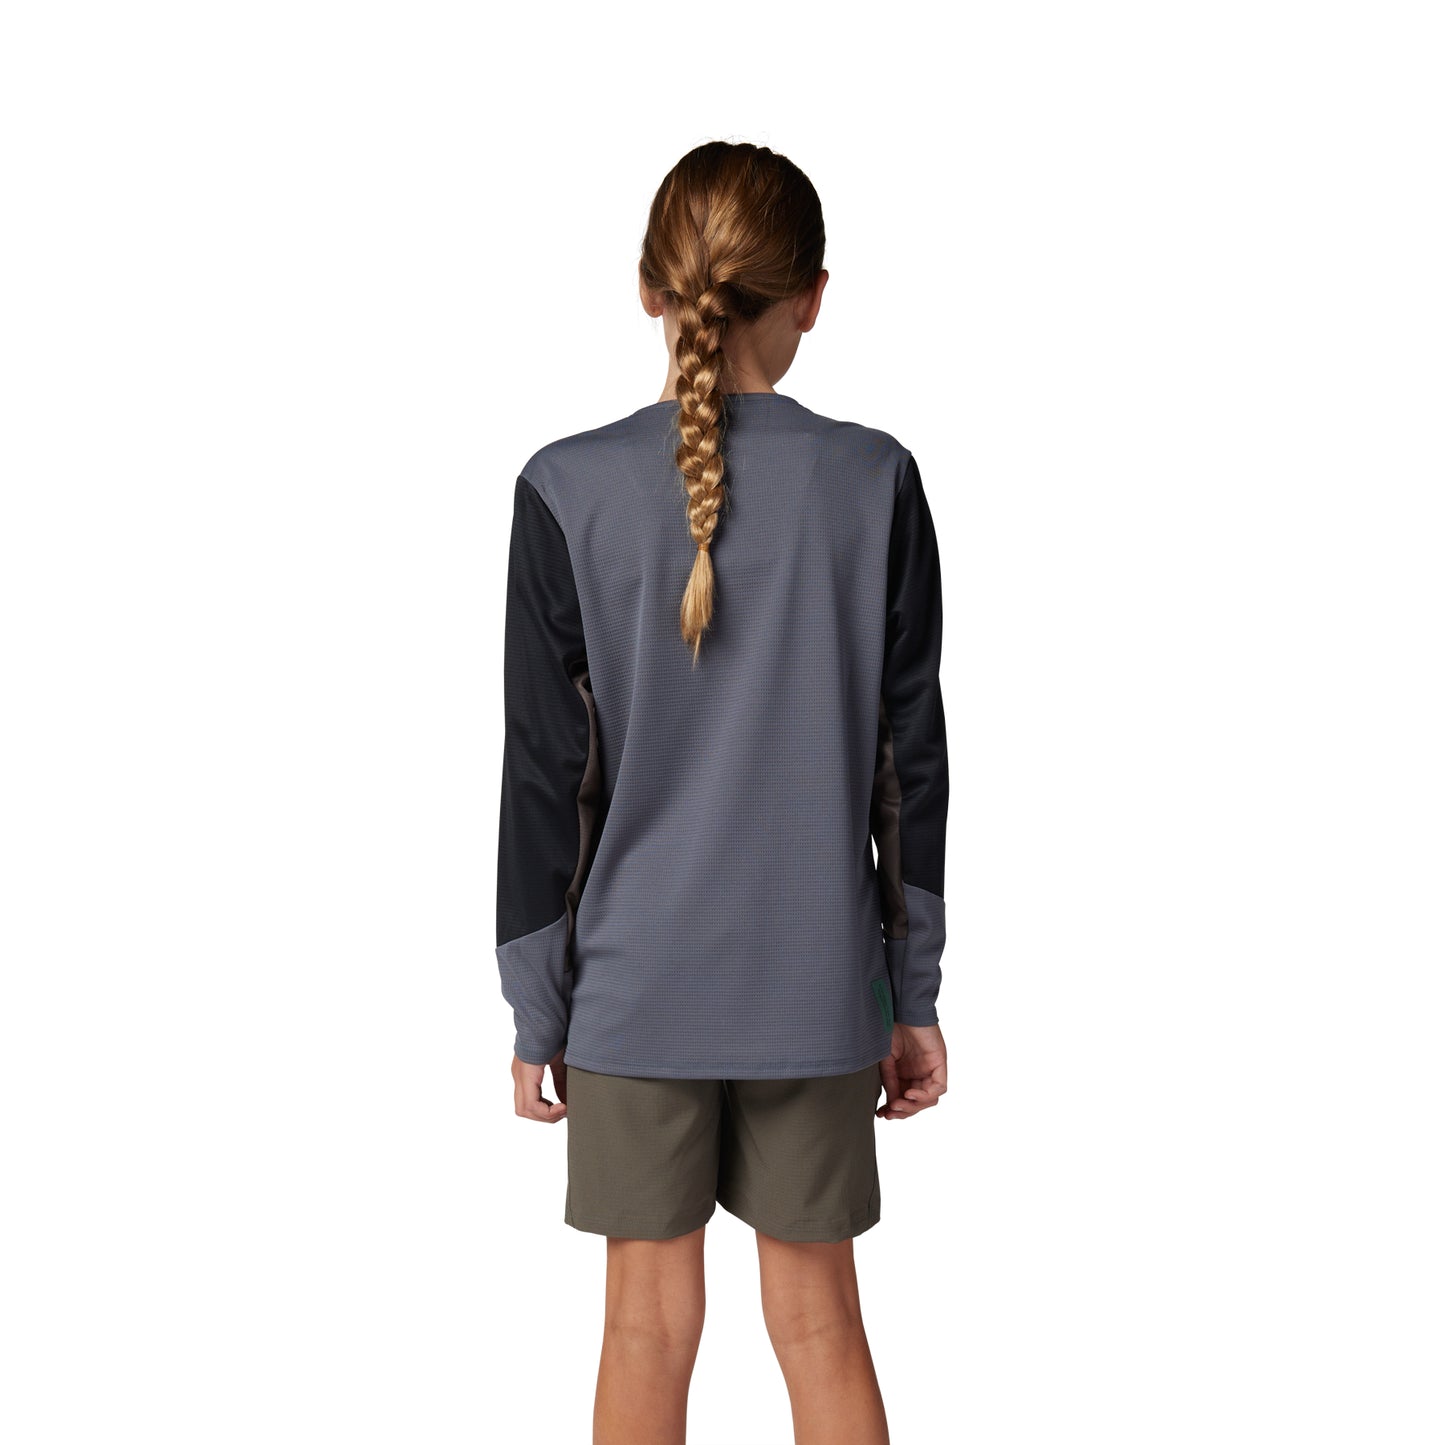 Fox Defend Youth Long Sleeve Jersey - Youth L - Graphite - Image 2